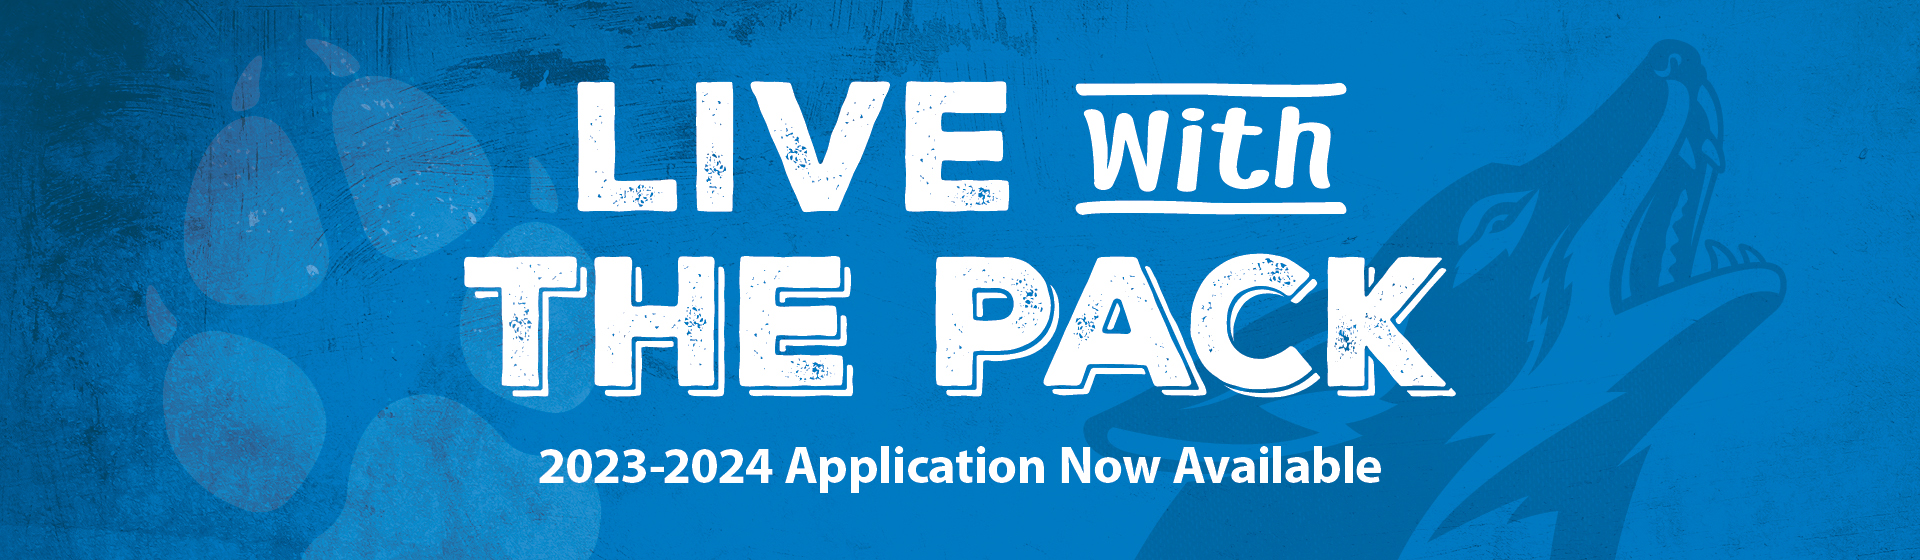 Live with the Pack: 2023-2024 Application Now Available